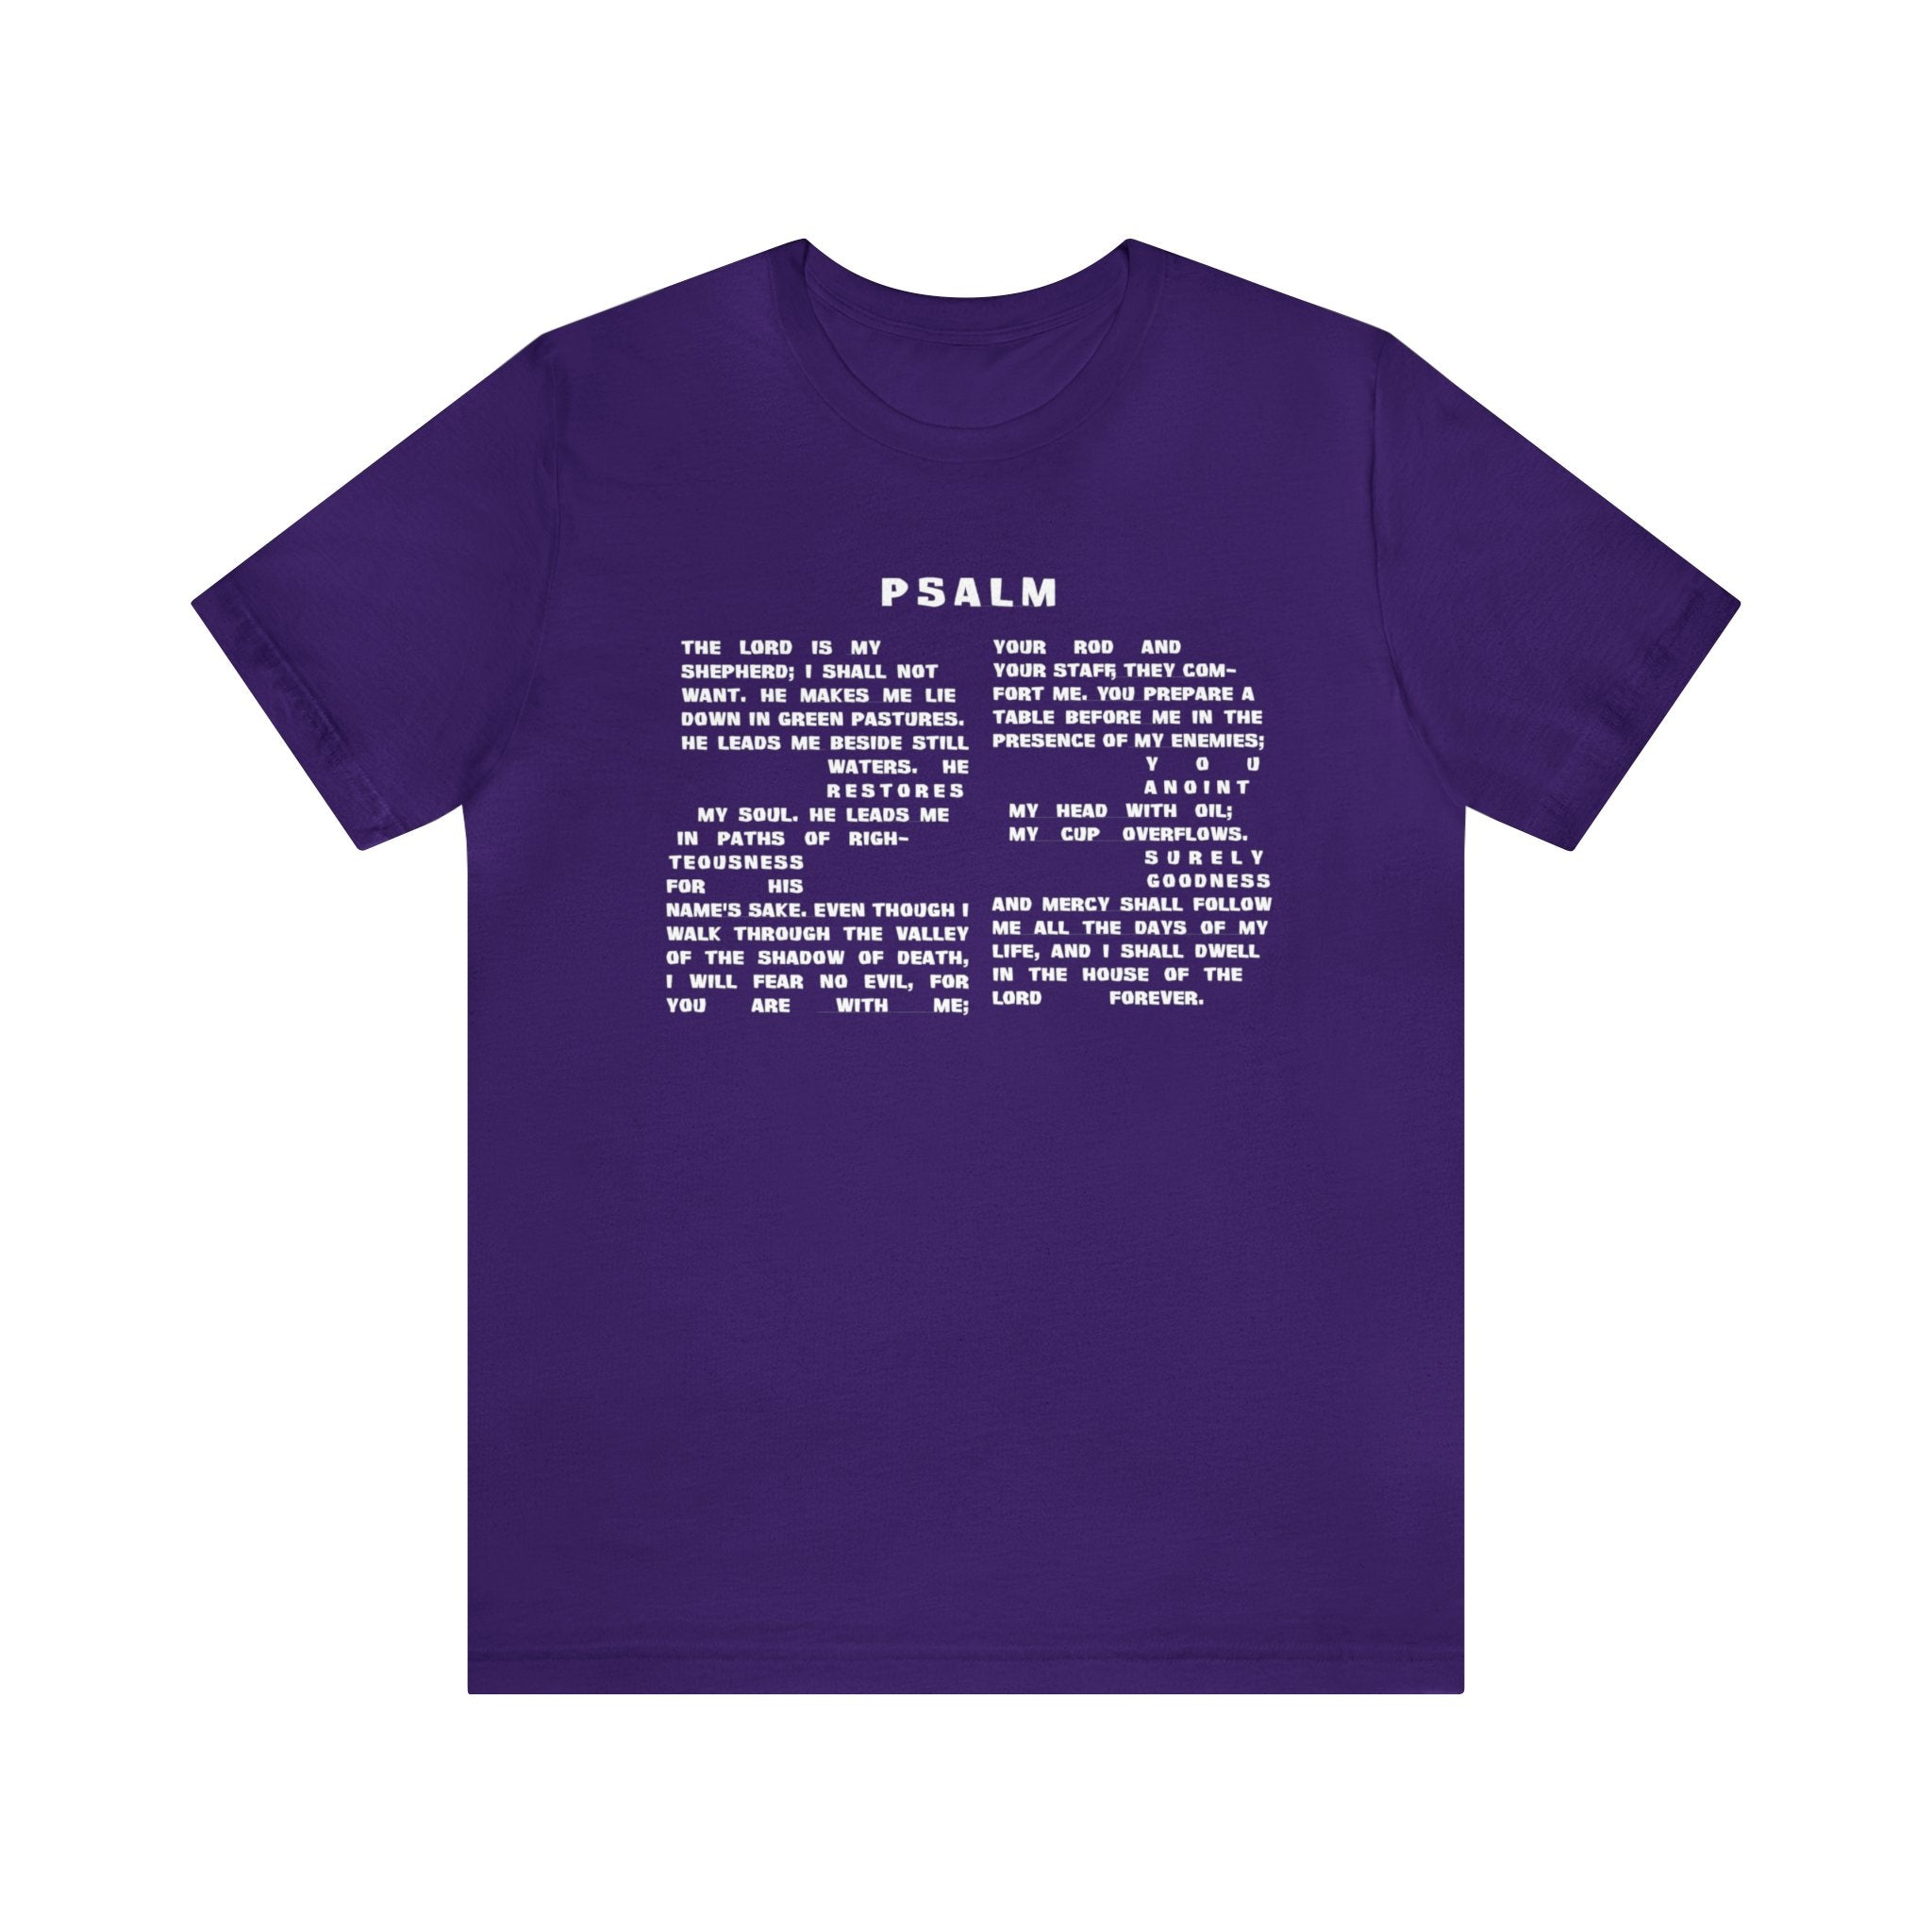 Psalm 23 Unisex Verse in Number T-Shirt Gift for Christians/Jews - Encore2woTeam PurpleS